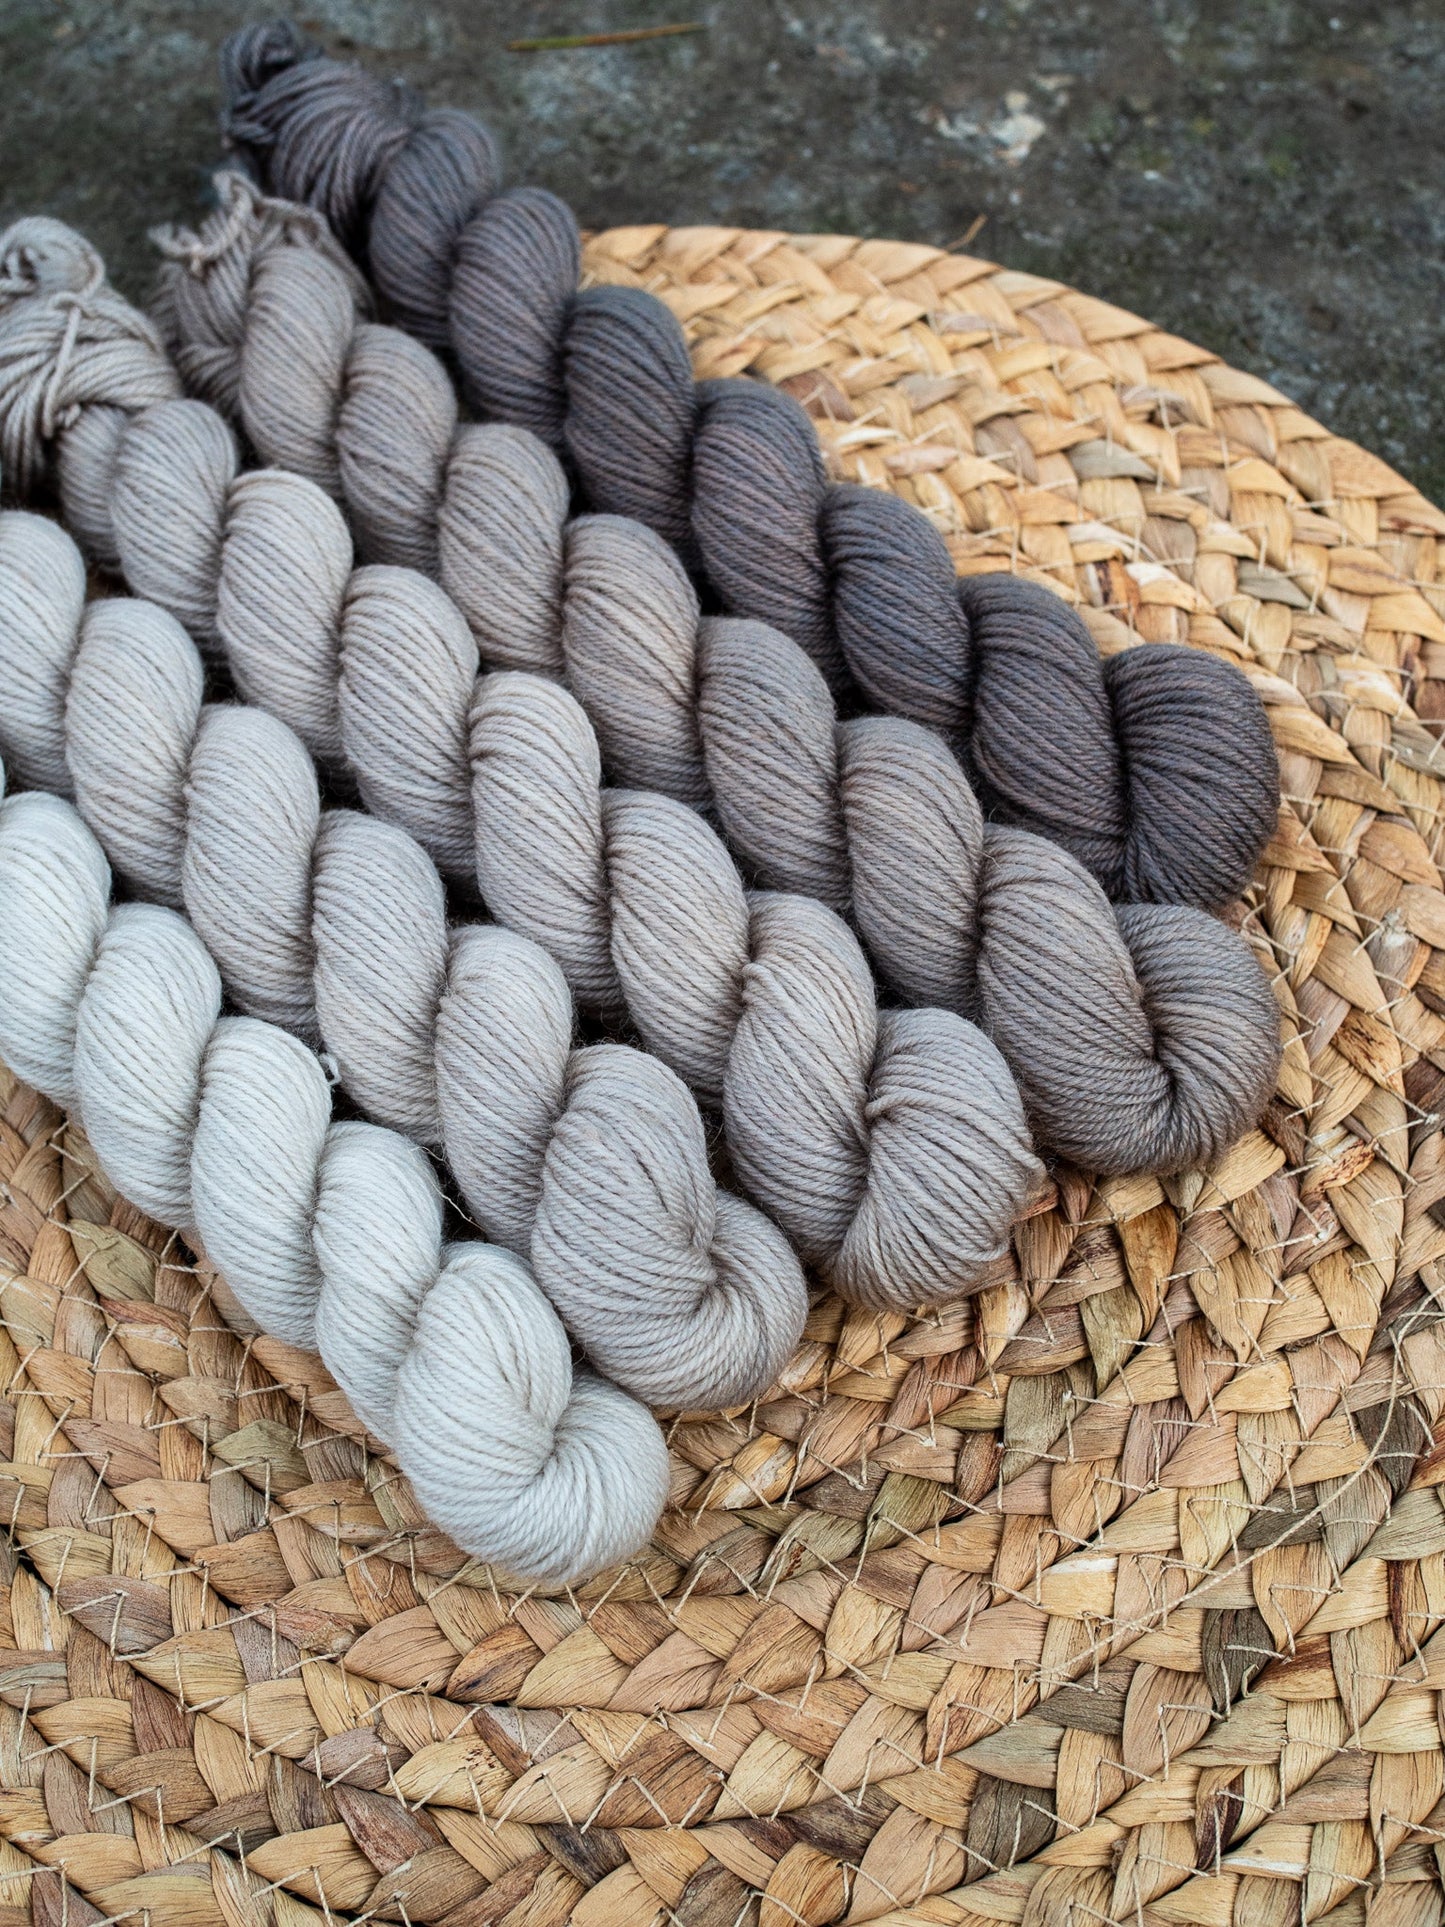 5 mini skeins of hand dyed yarn in a gradient/fade set in color caffèlatte brown.